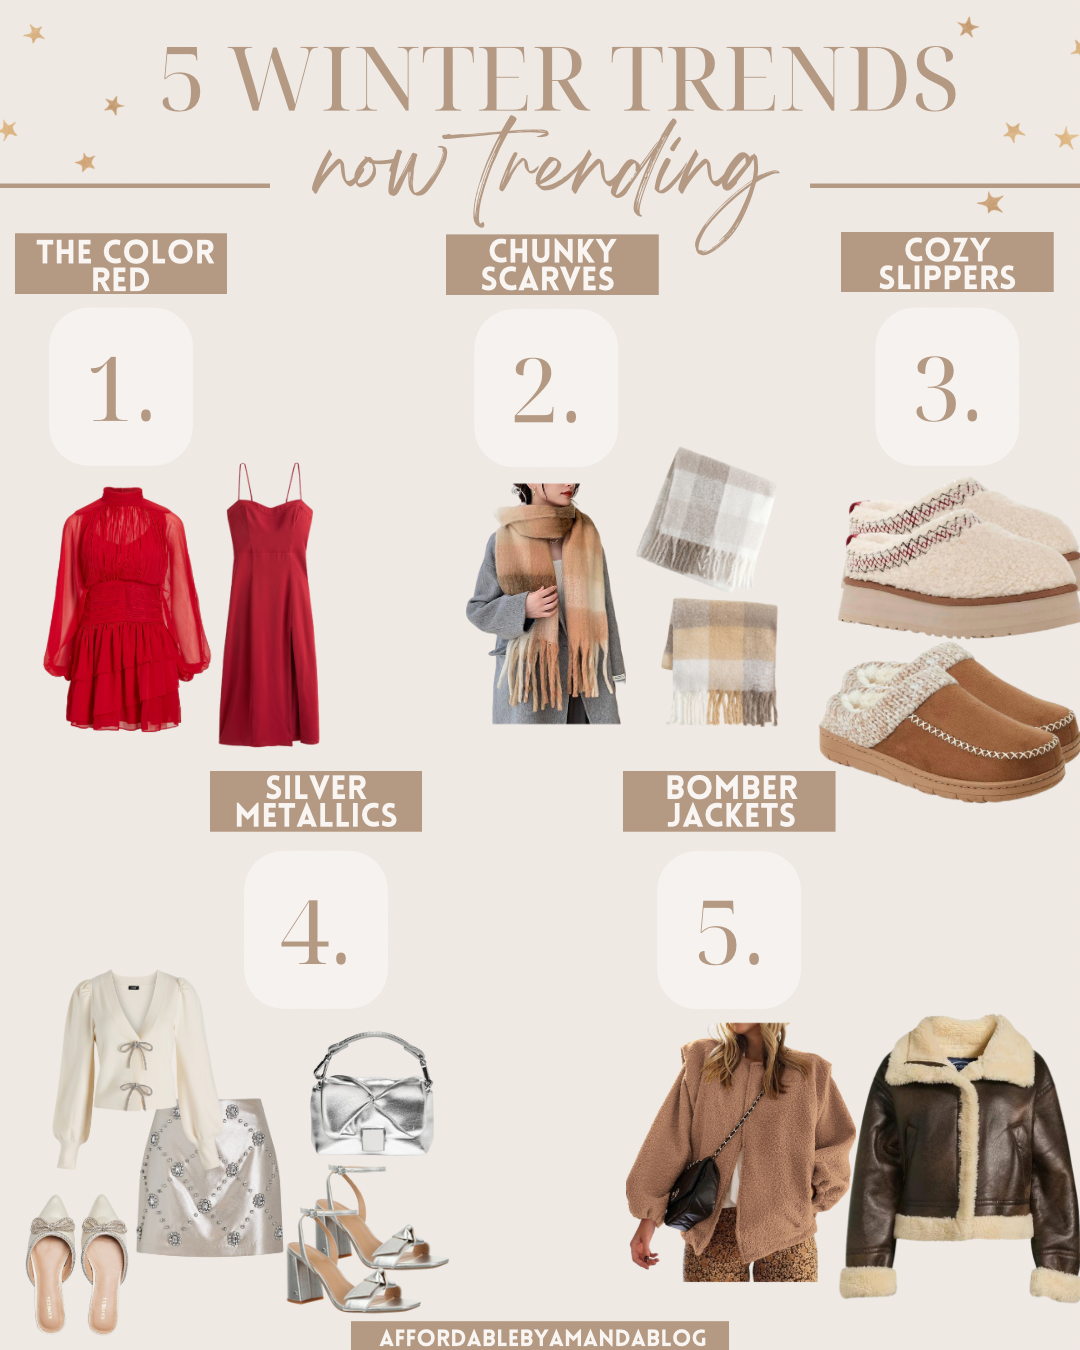 5 Winter Fashion Trends To Wear Now - Affordable by Amanda